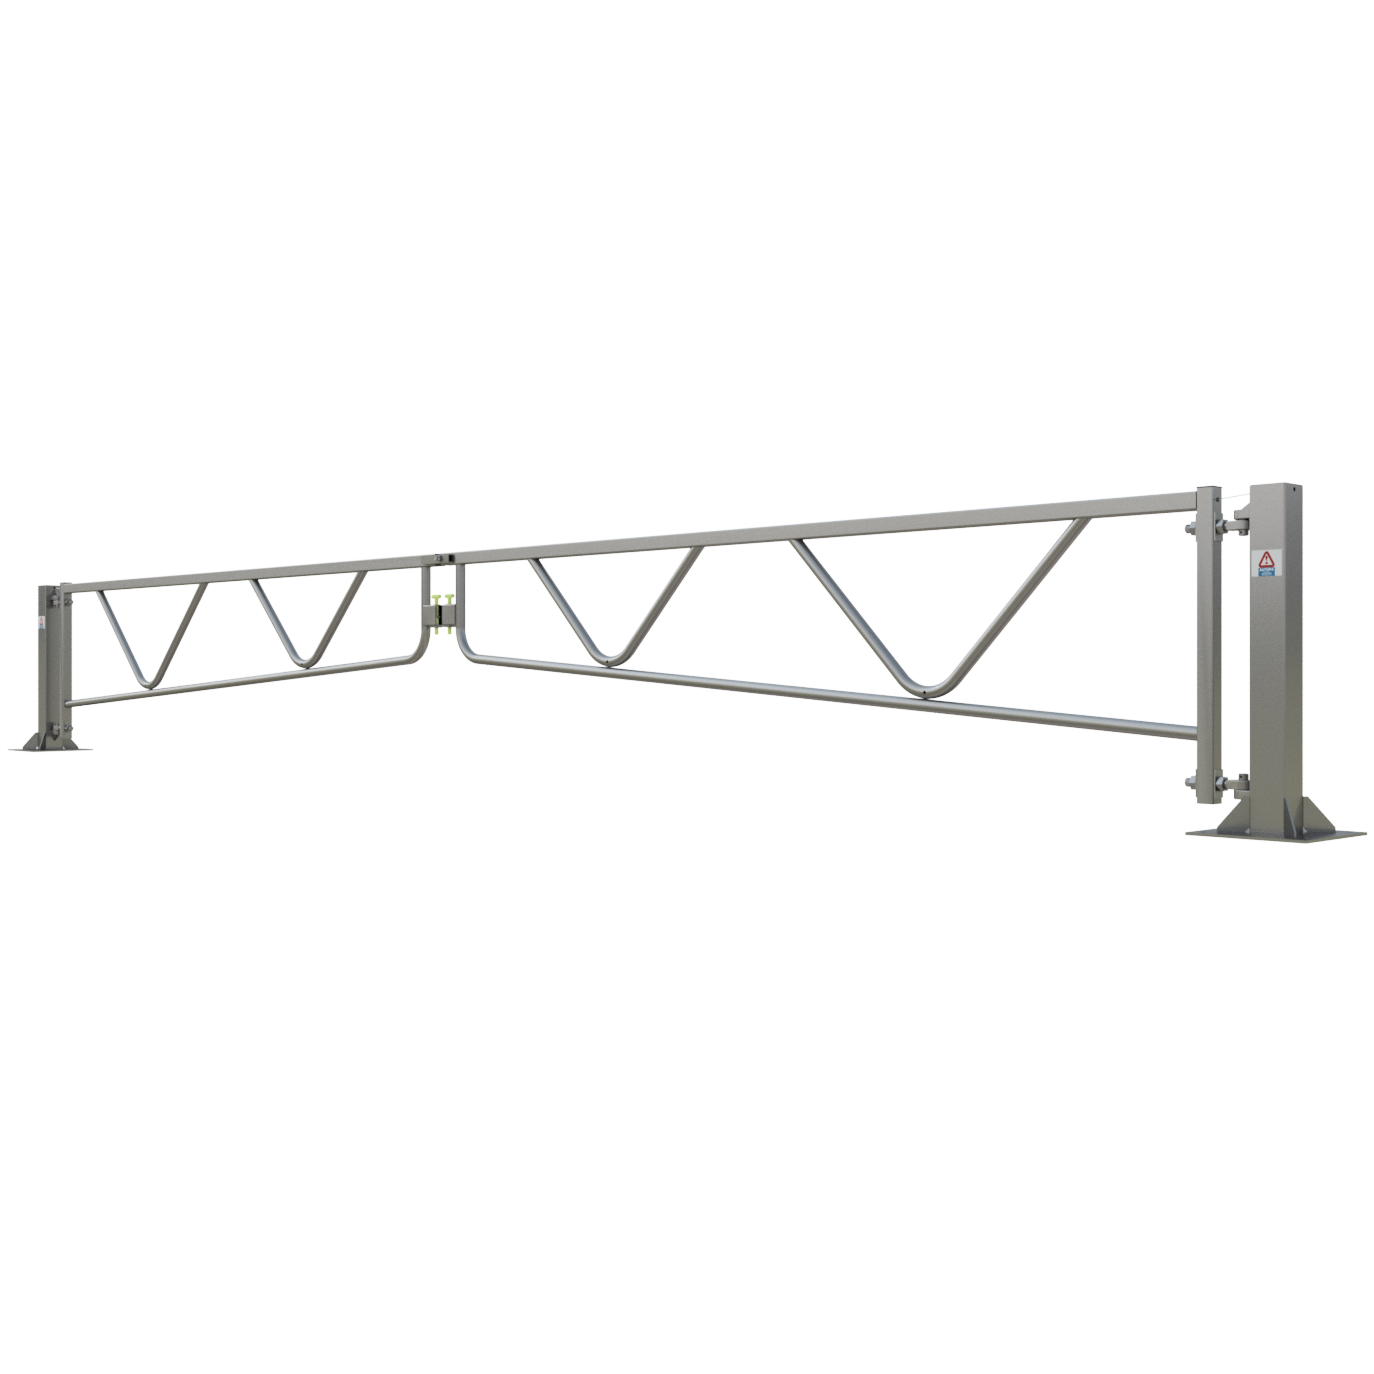 Manually Operated Double Swing Gate